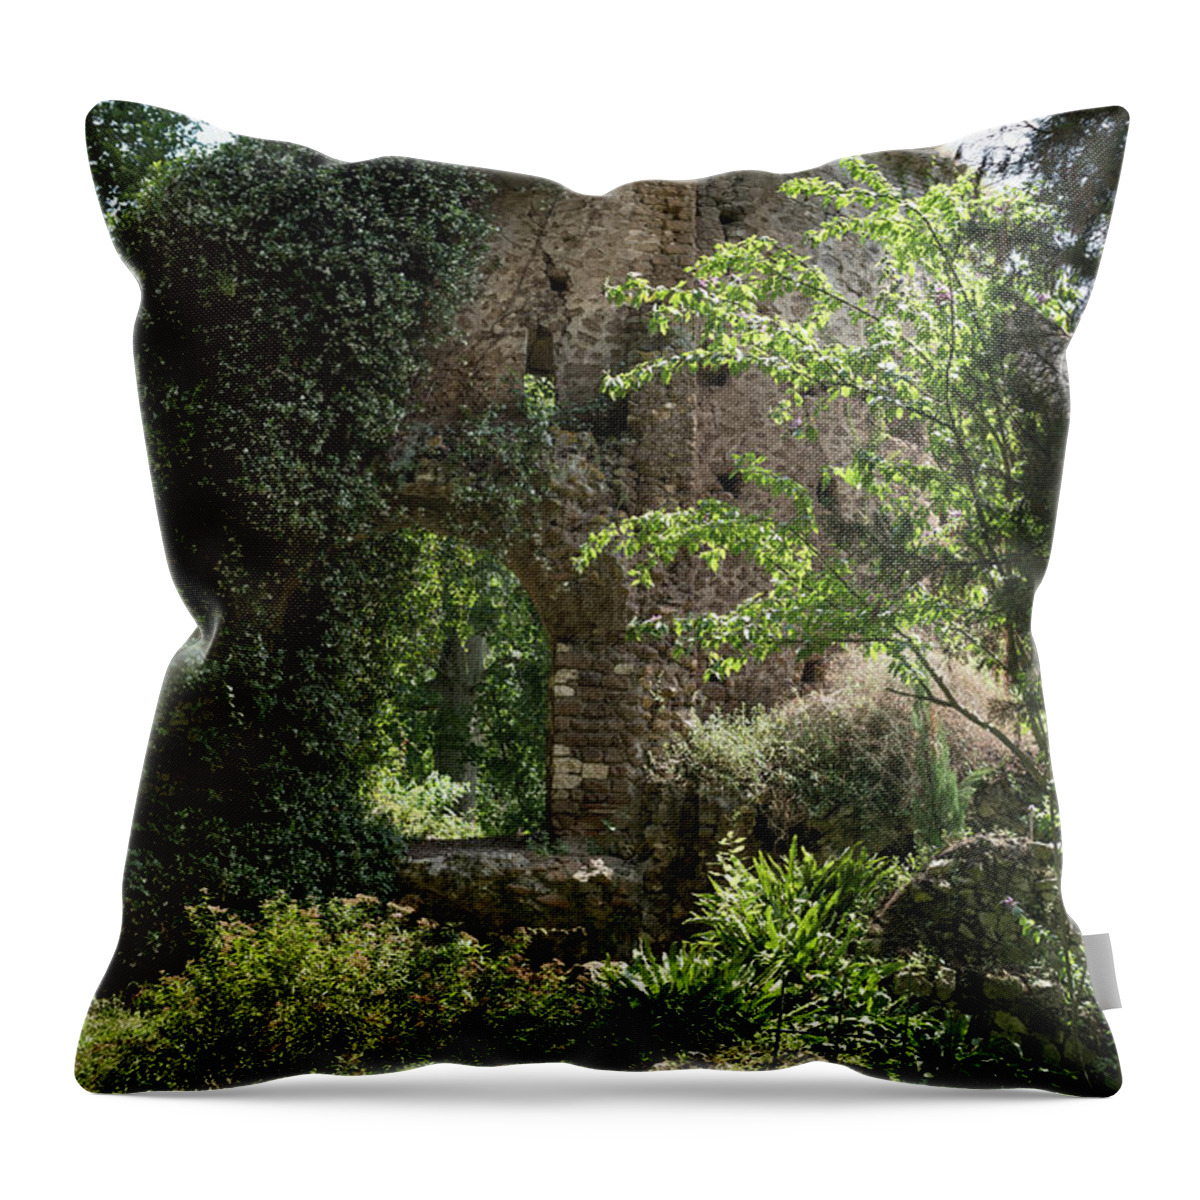 Ninfa Throw Pillow featuring the photograph Ninfa Garden, Rome Italy 2 by Perry Rodriguez